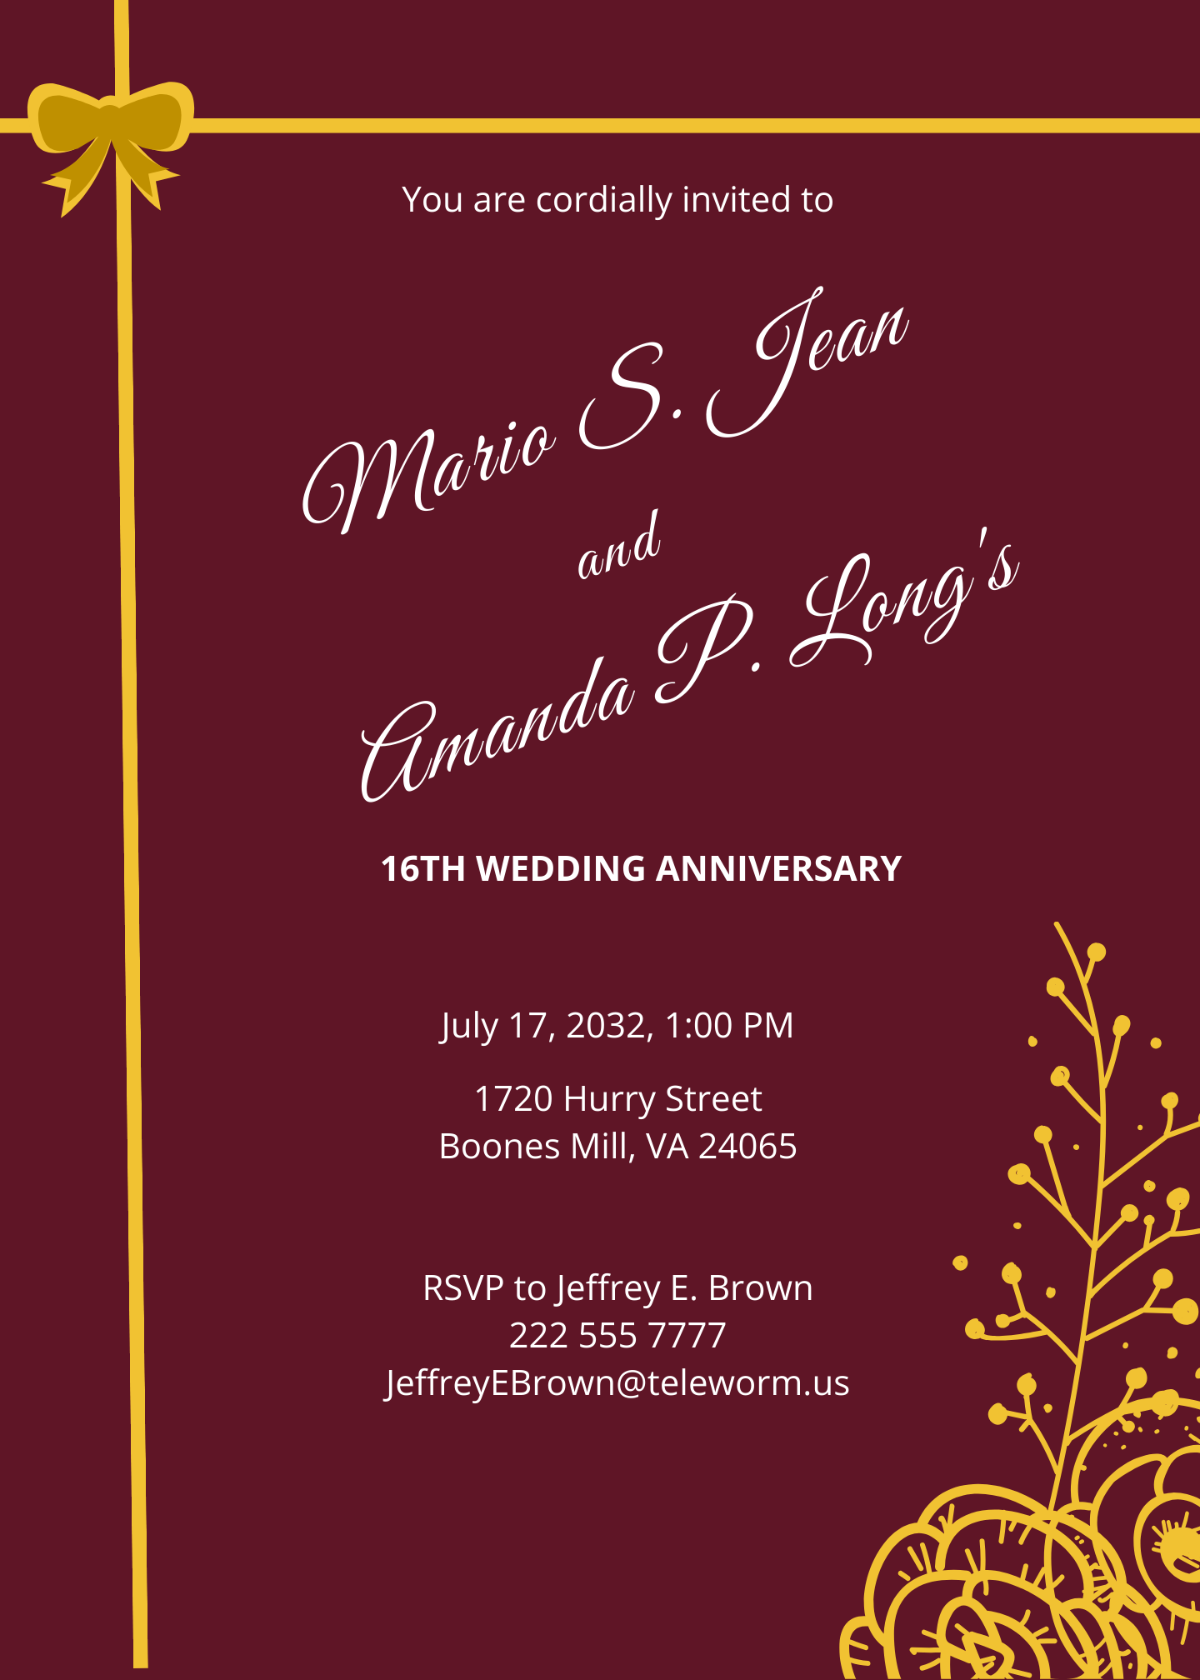 Anniversary Invitation With Maroon and Gold Ribbons